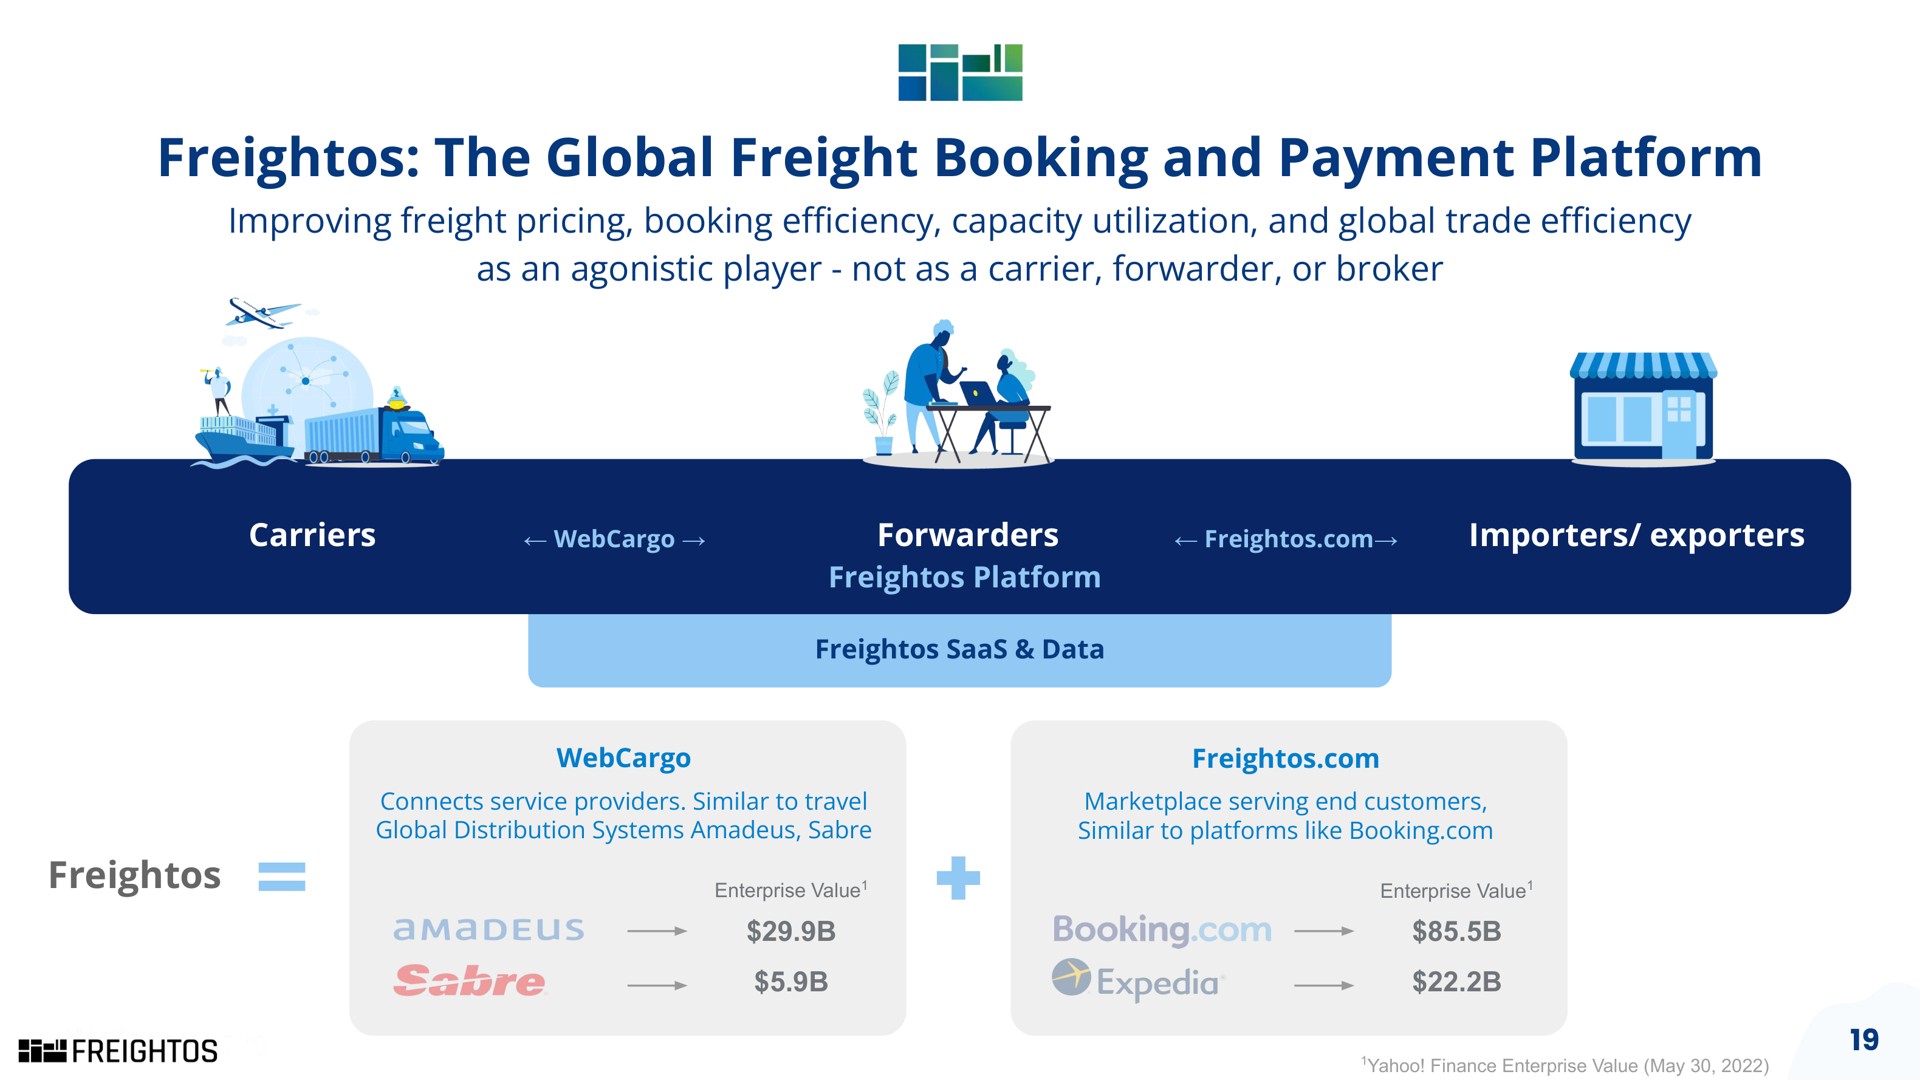 the global freight booking and payment platform | Freightos